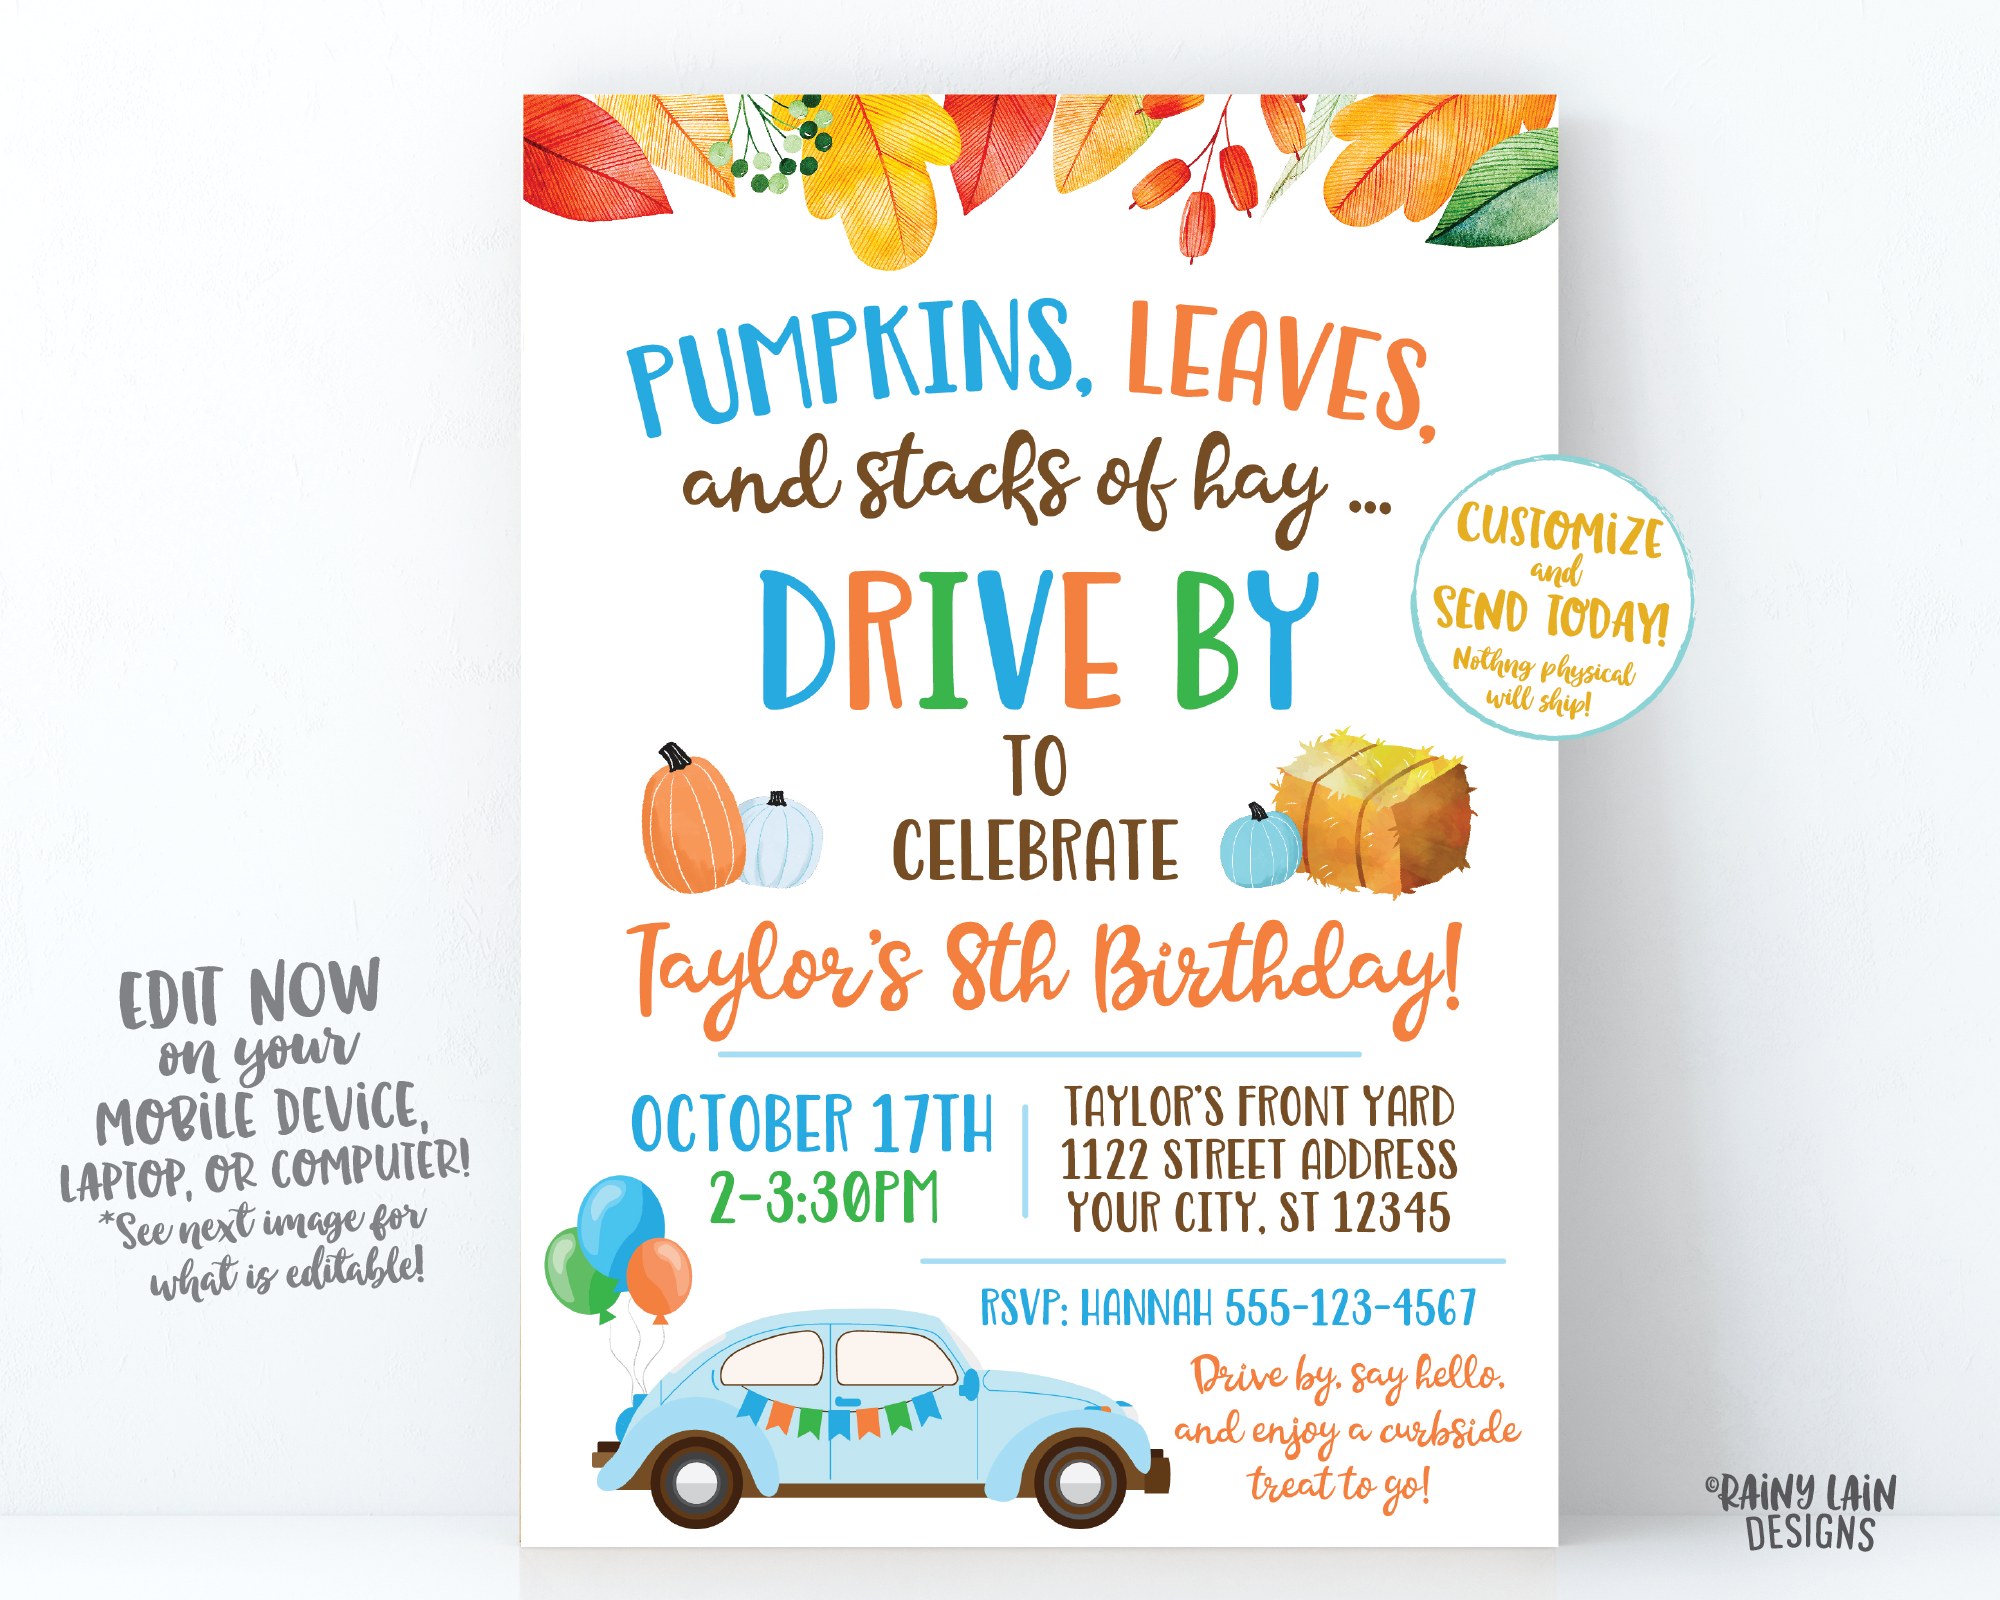 Fall Drive By Birthday Invitation Autumn Drive By Birthday Party Fall Leaves Autumn Leaves Drive Through Boy Pumpkins Leaves Stacks of Hay